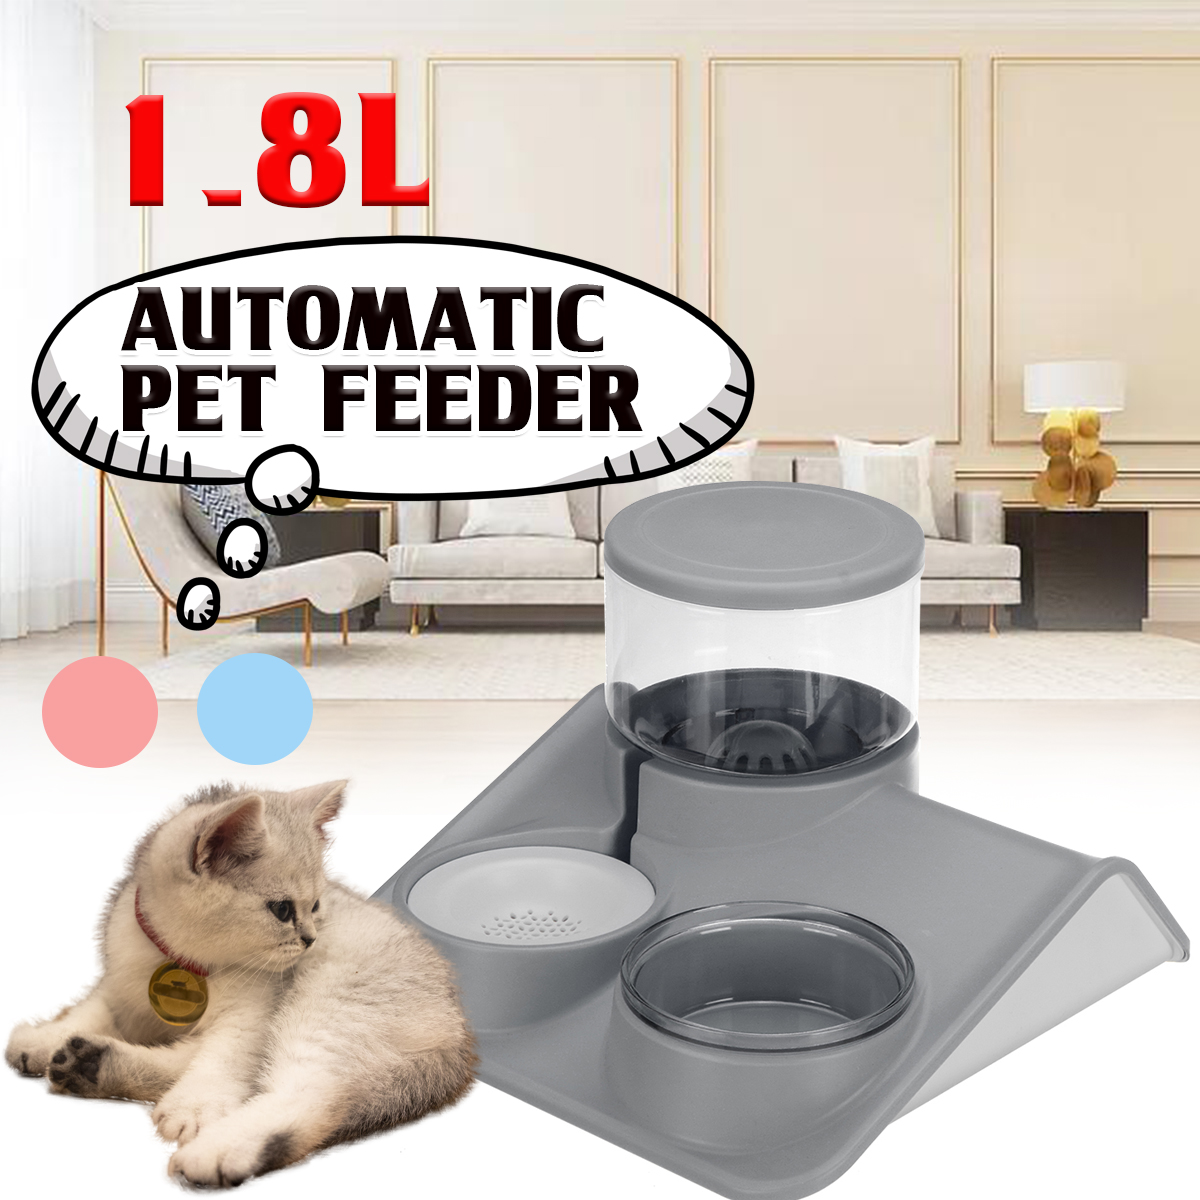 Pet-Waterer-Multi-Layer-Filter-Sealed-Cat-Bowl-2L-Pet-Bowl-for-Automatic-Cat-Drinking-and-Feeding-De-1912352-1